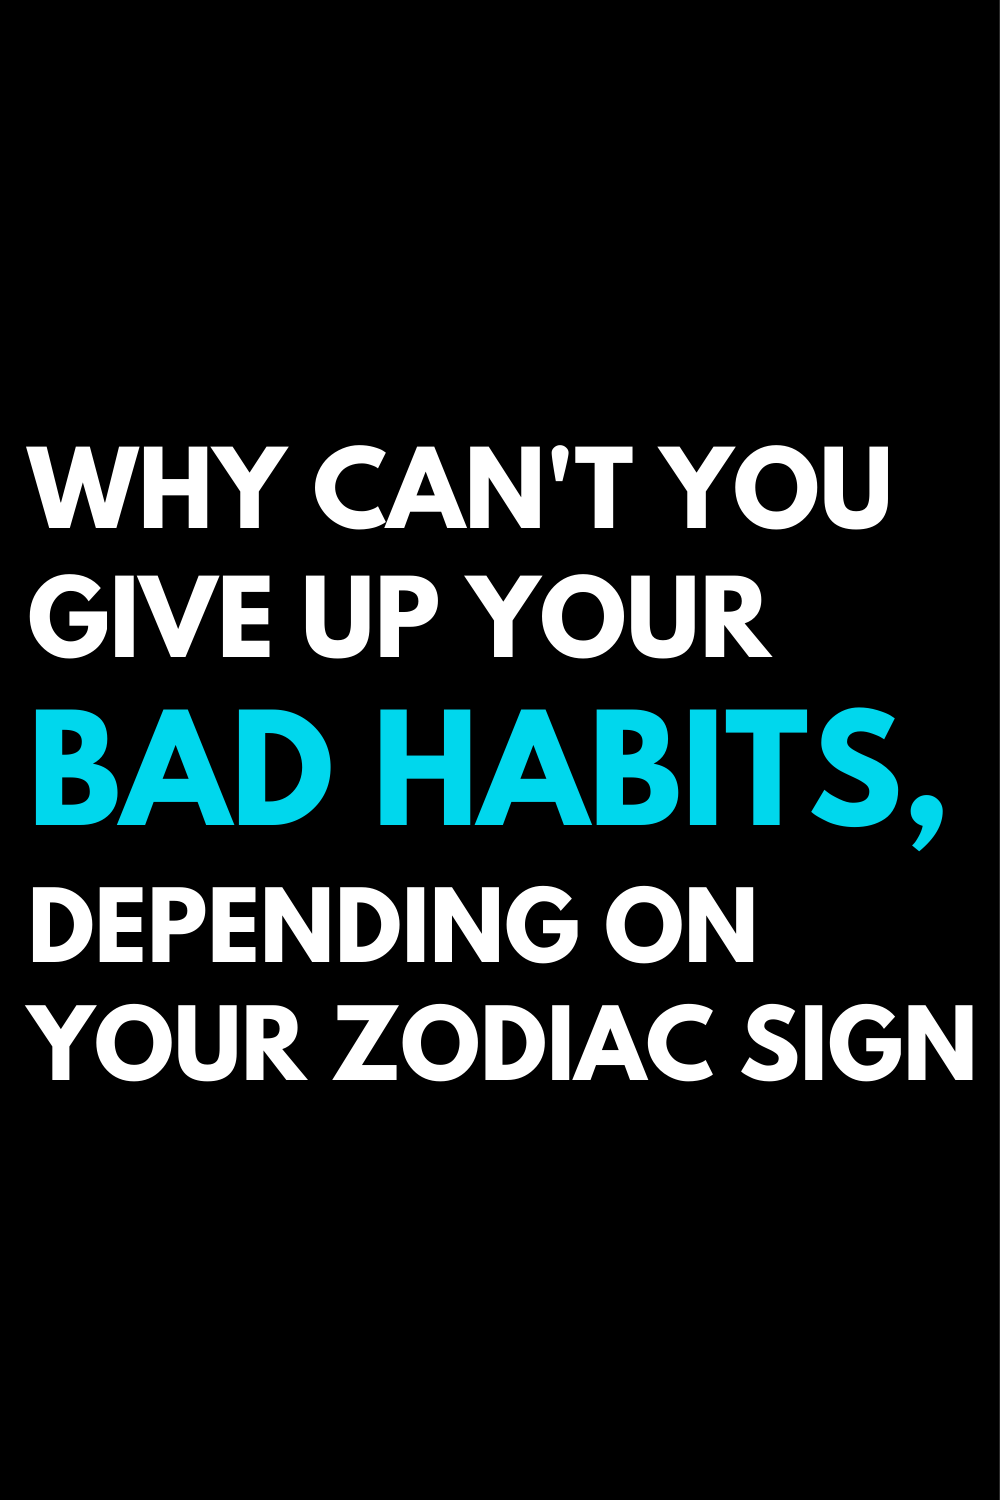 Why can't you give up your bad habits, depending on your zodiac sign